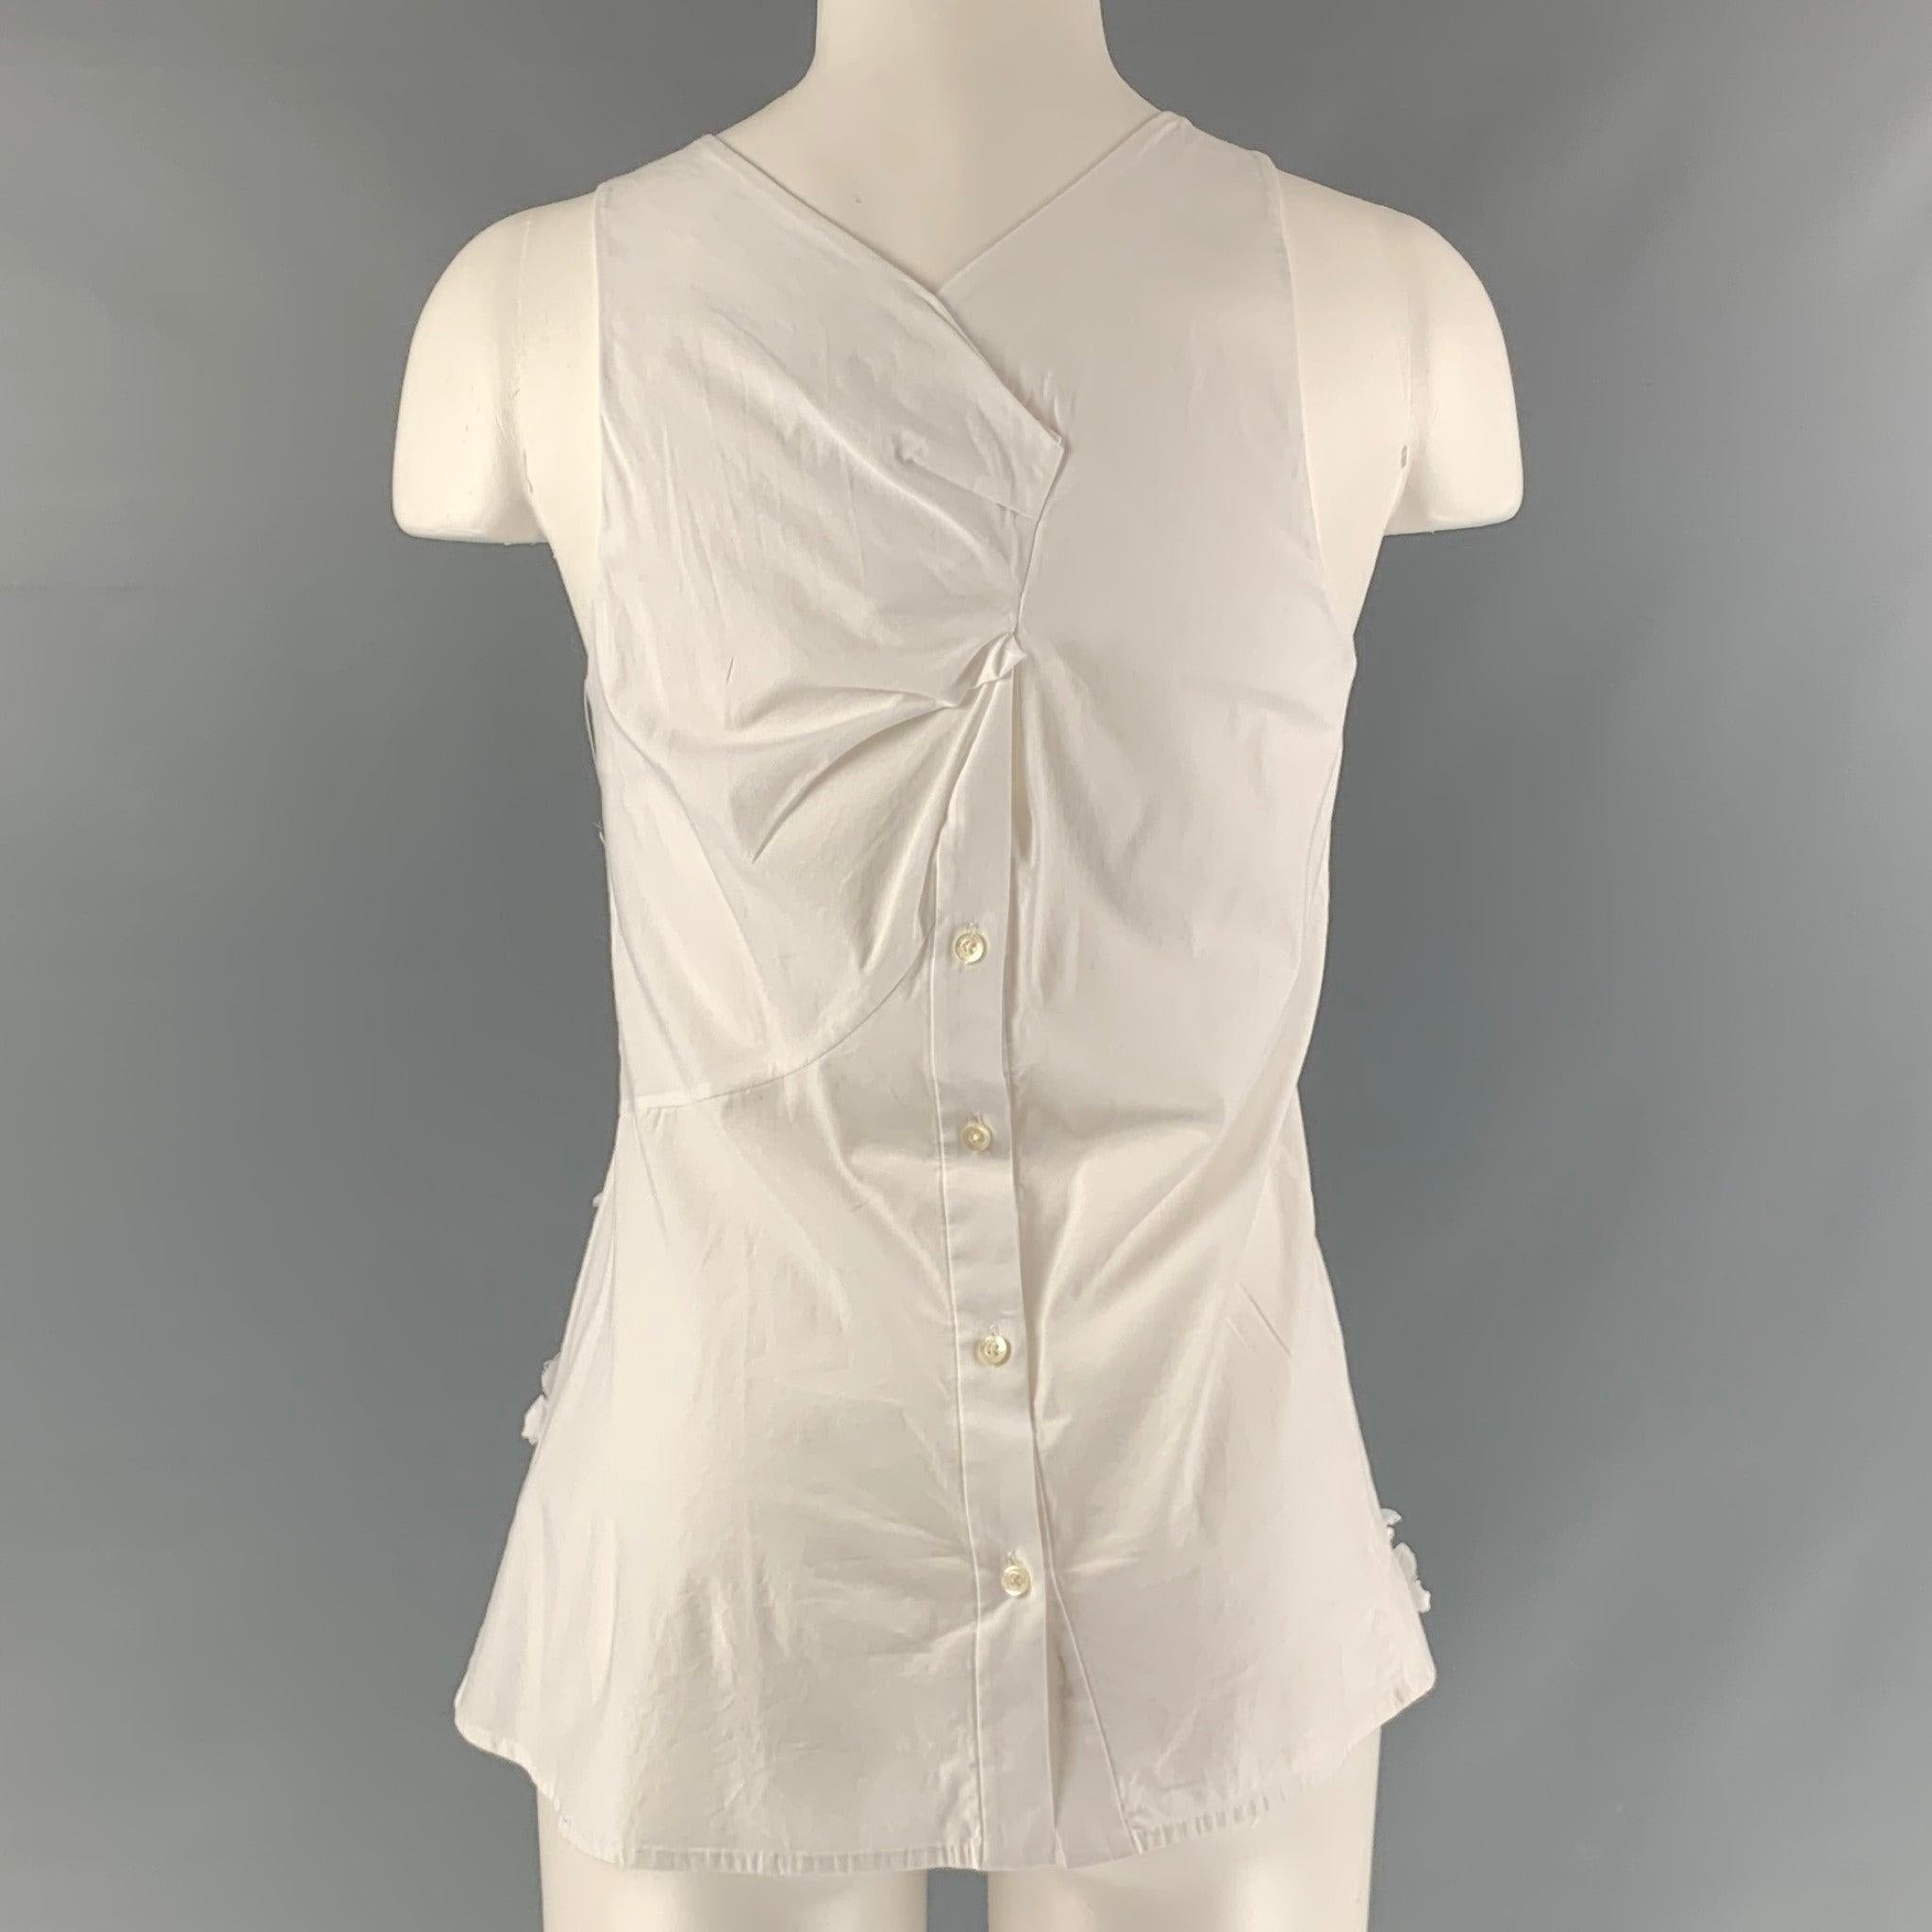 THAKOON Size 2 White Cotton Blend Aplique A-Line Blouse In Good Condition For Sale In San Francisco, CA